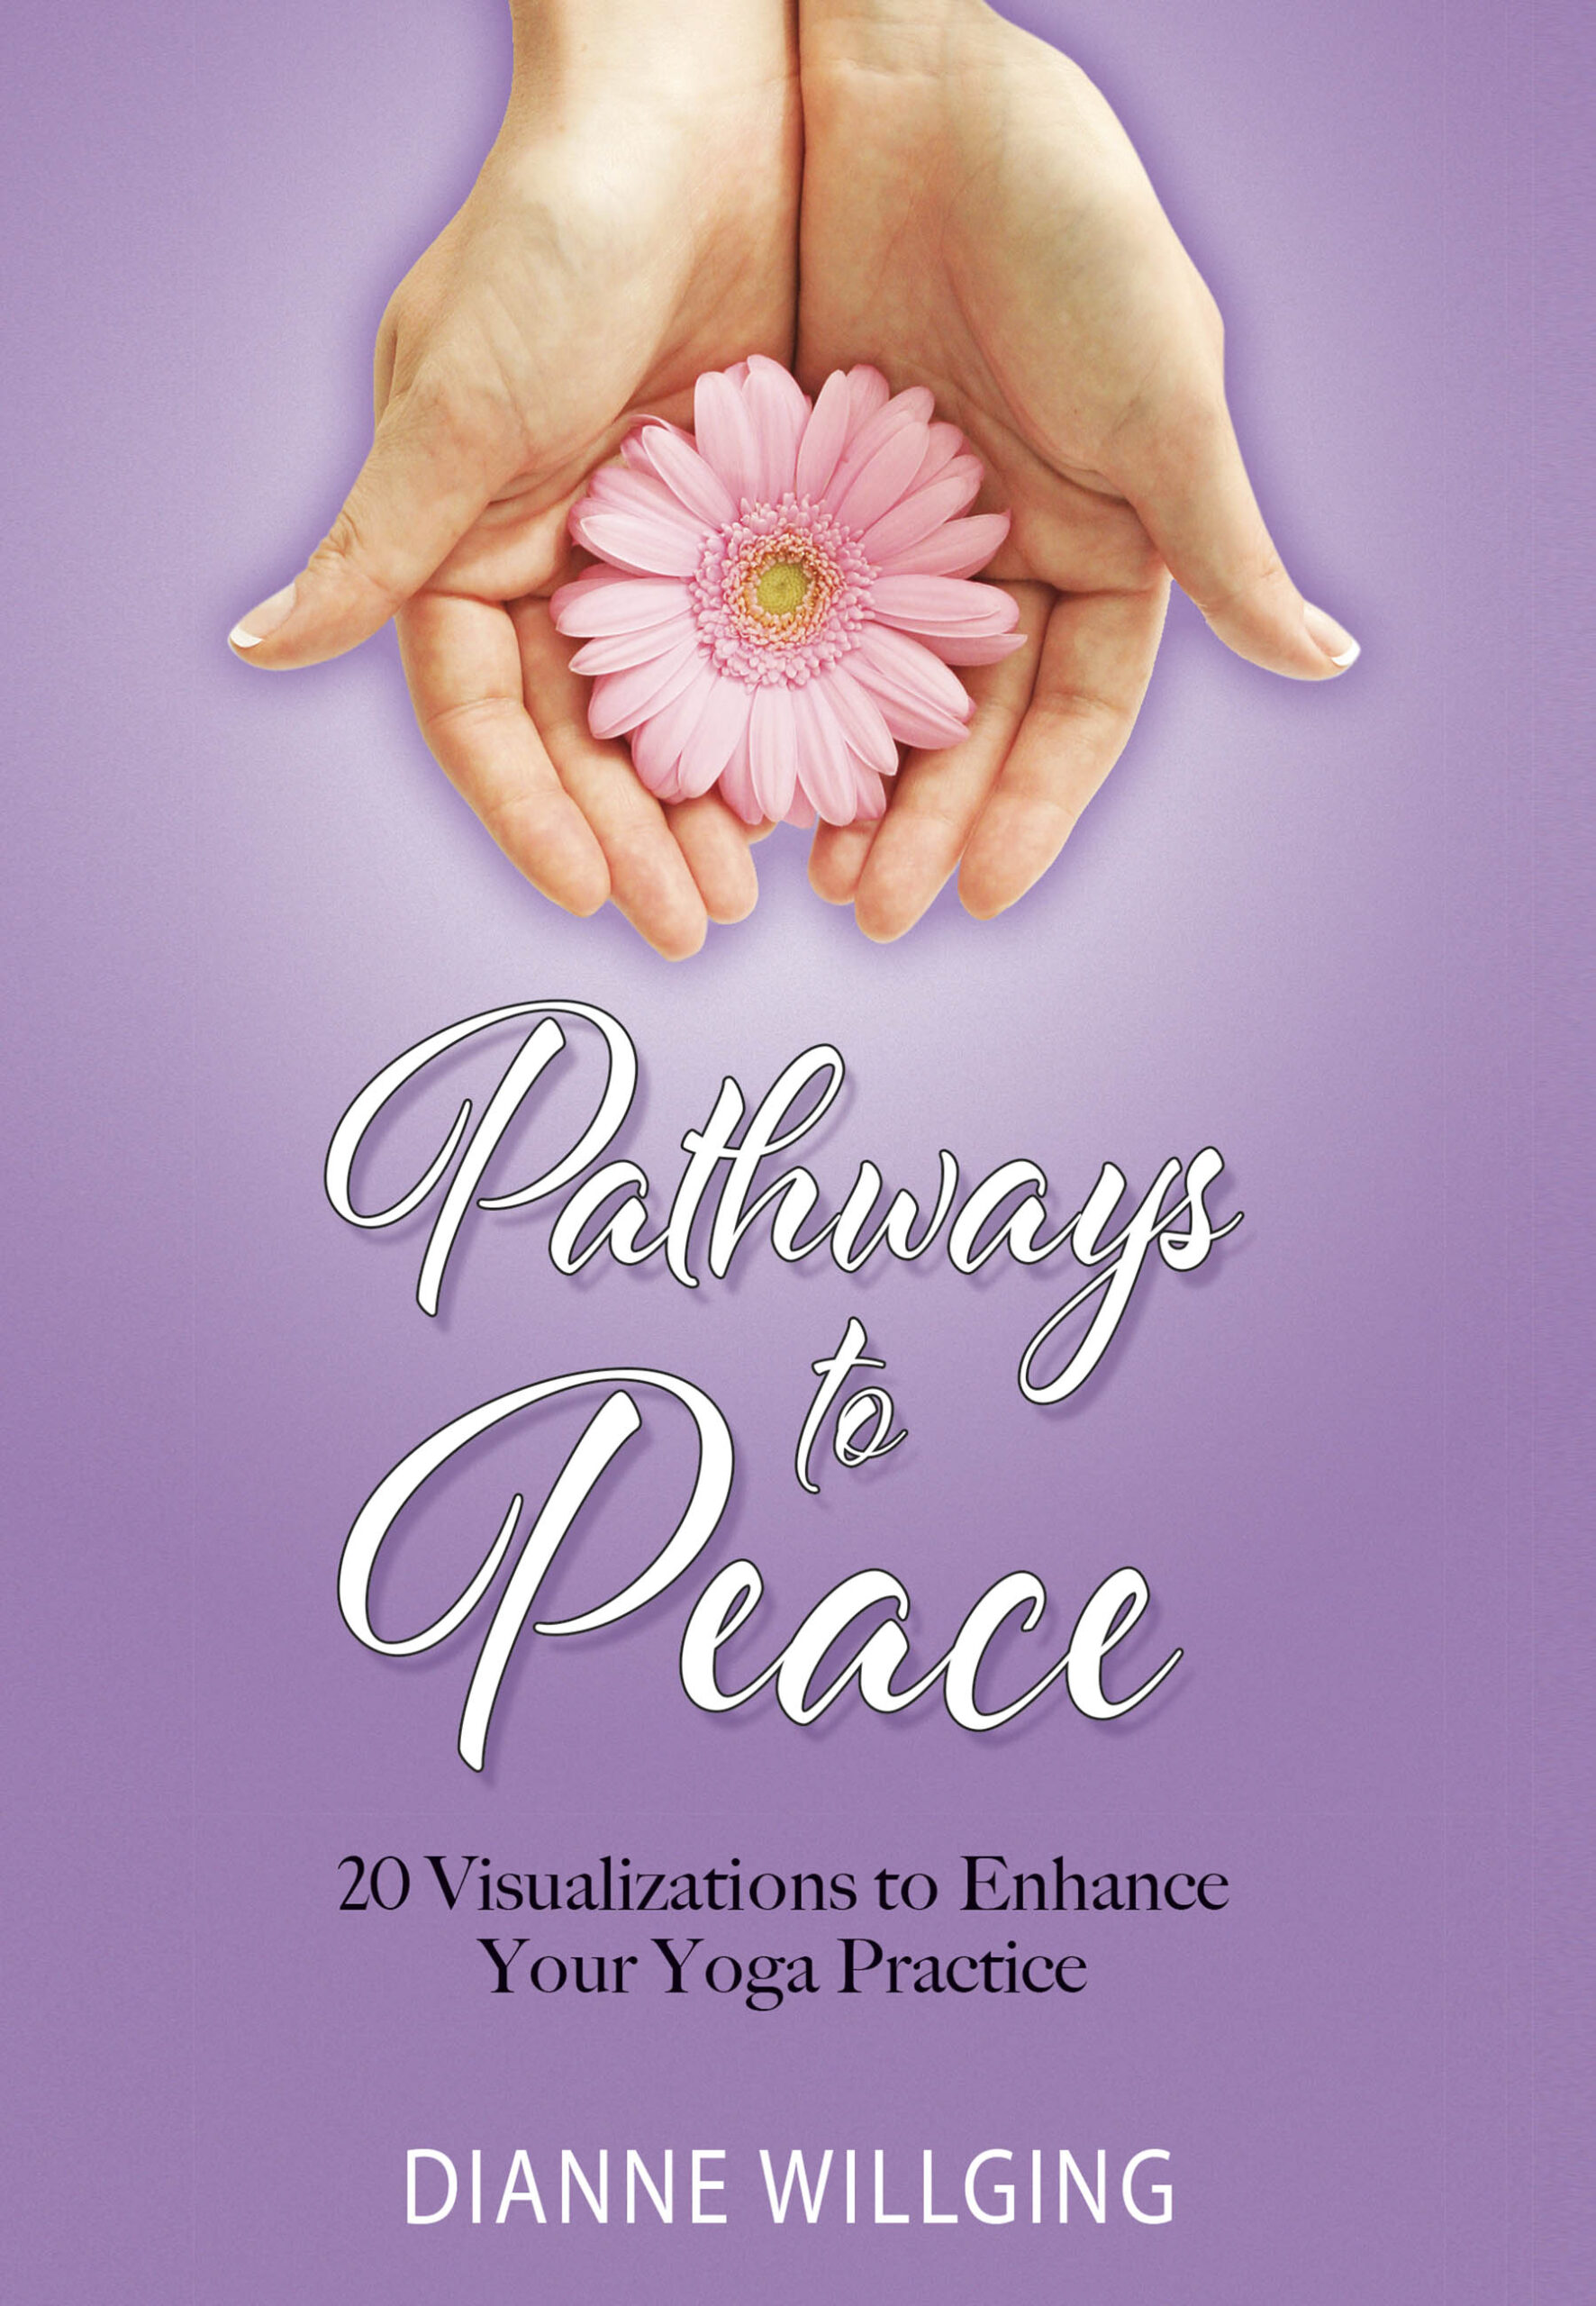 FREE: Pathways to Peace: 20 Visualizations to Enhance Your Yoga Practice by Dianne Willging